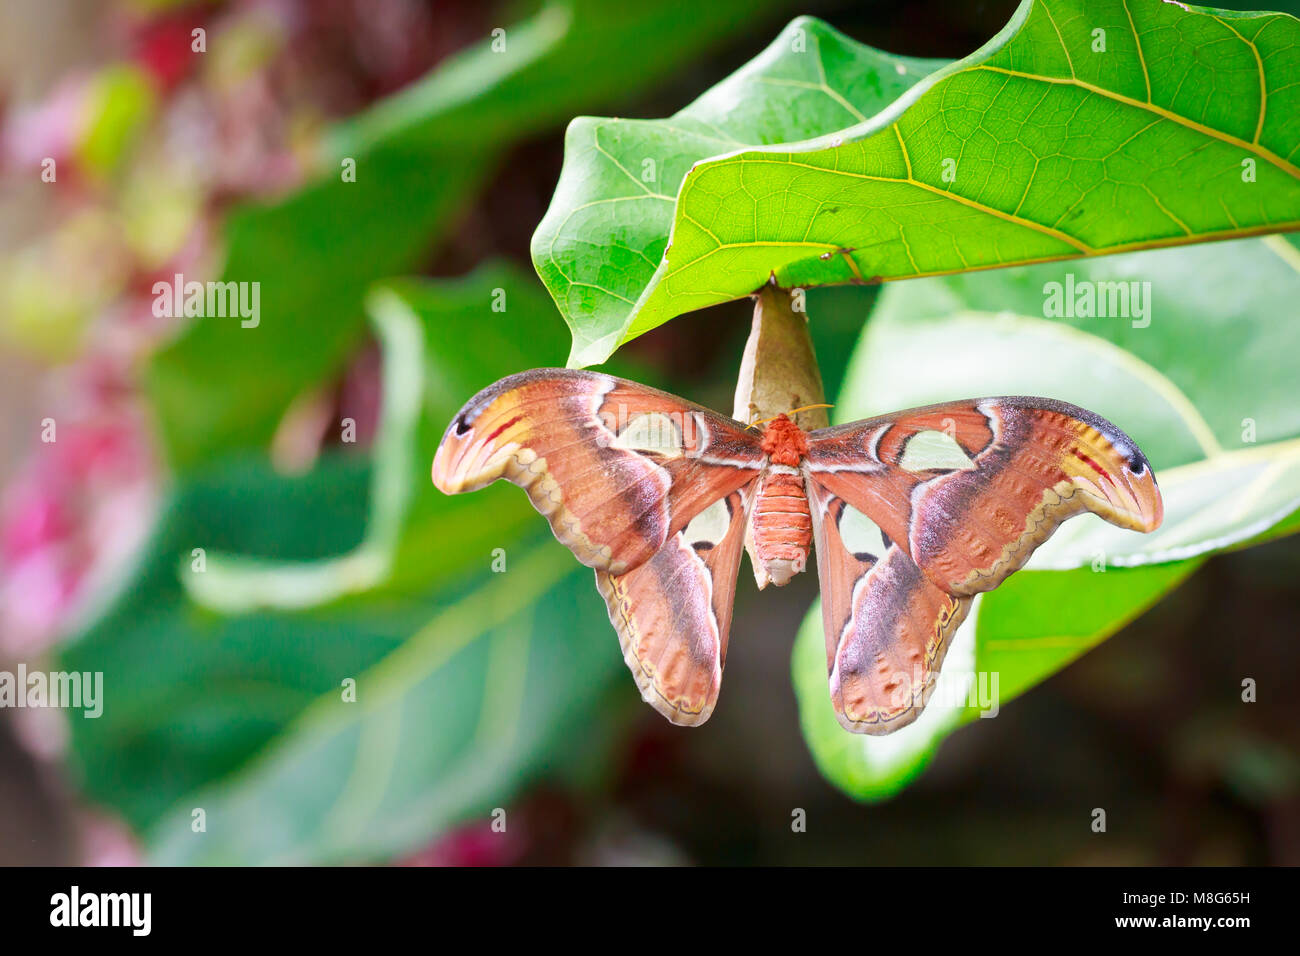 Large Atlas moth tropical butterfly (Attacus atlas) resting on a big green leaf in jungle vegetation. Stock Photo